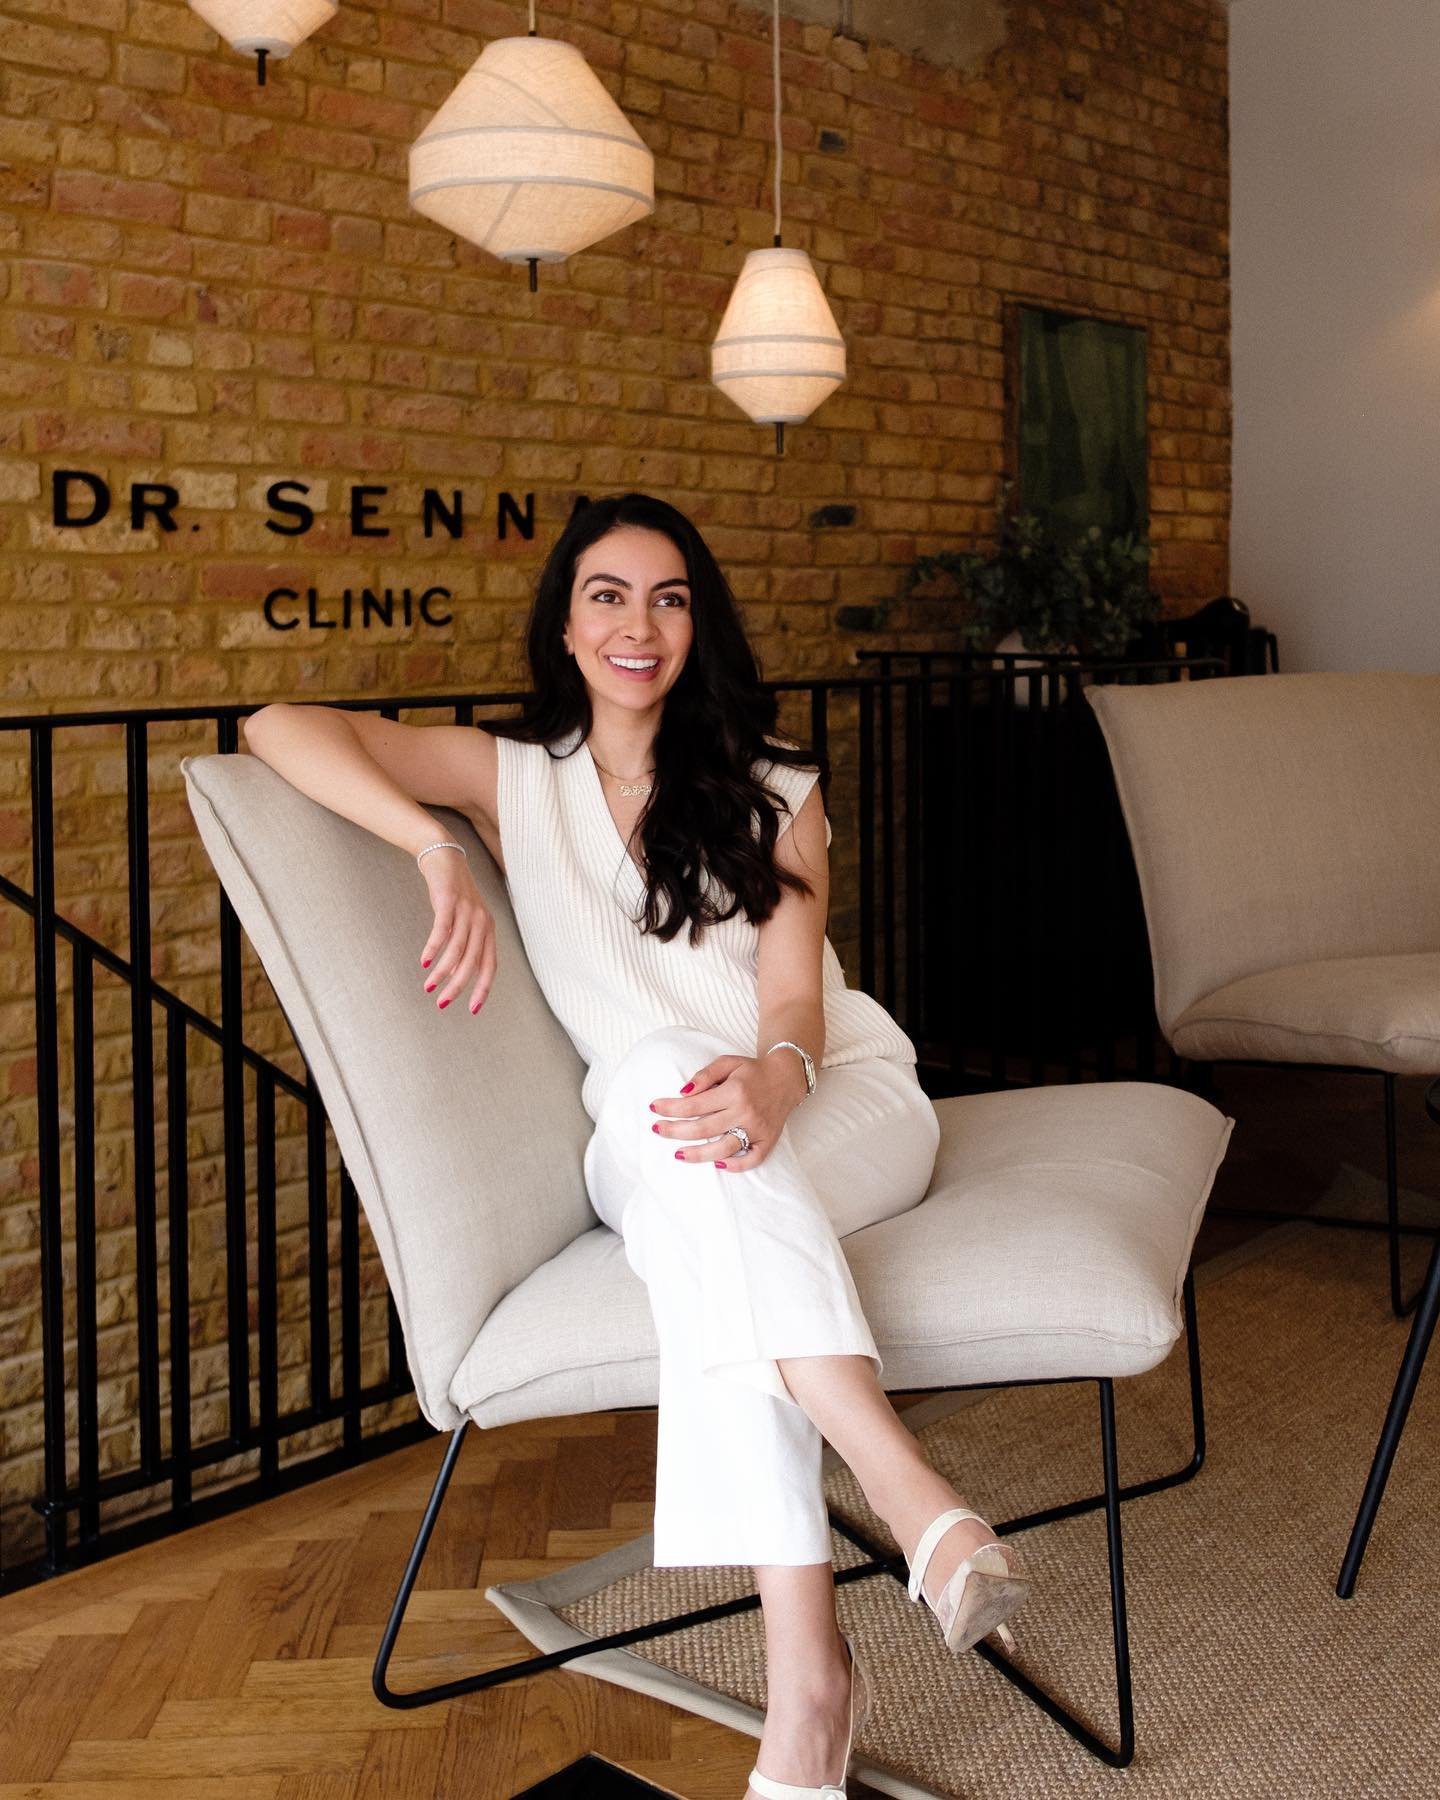 It&rsquo;s been a while since I did an intro, so I thought I&rsquo;d give a little background for all the new faces that have joined me on here! 

I&rsquo;m Dr. Senna and I&rsquo;ve recently launched my new clinic in Barnes. As a dentist, I&rsquo;ve 